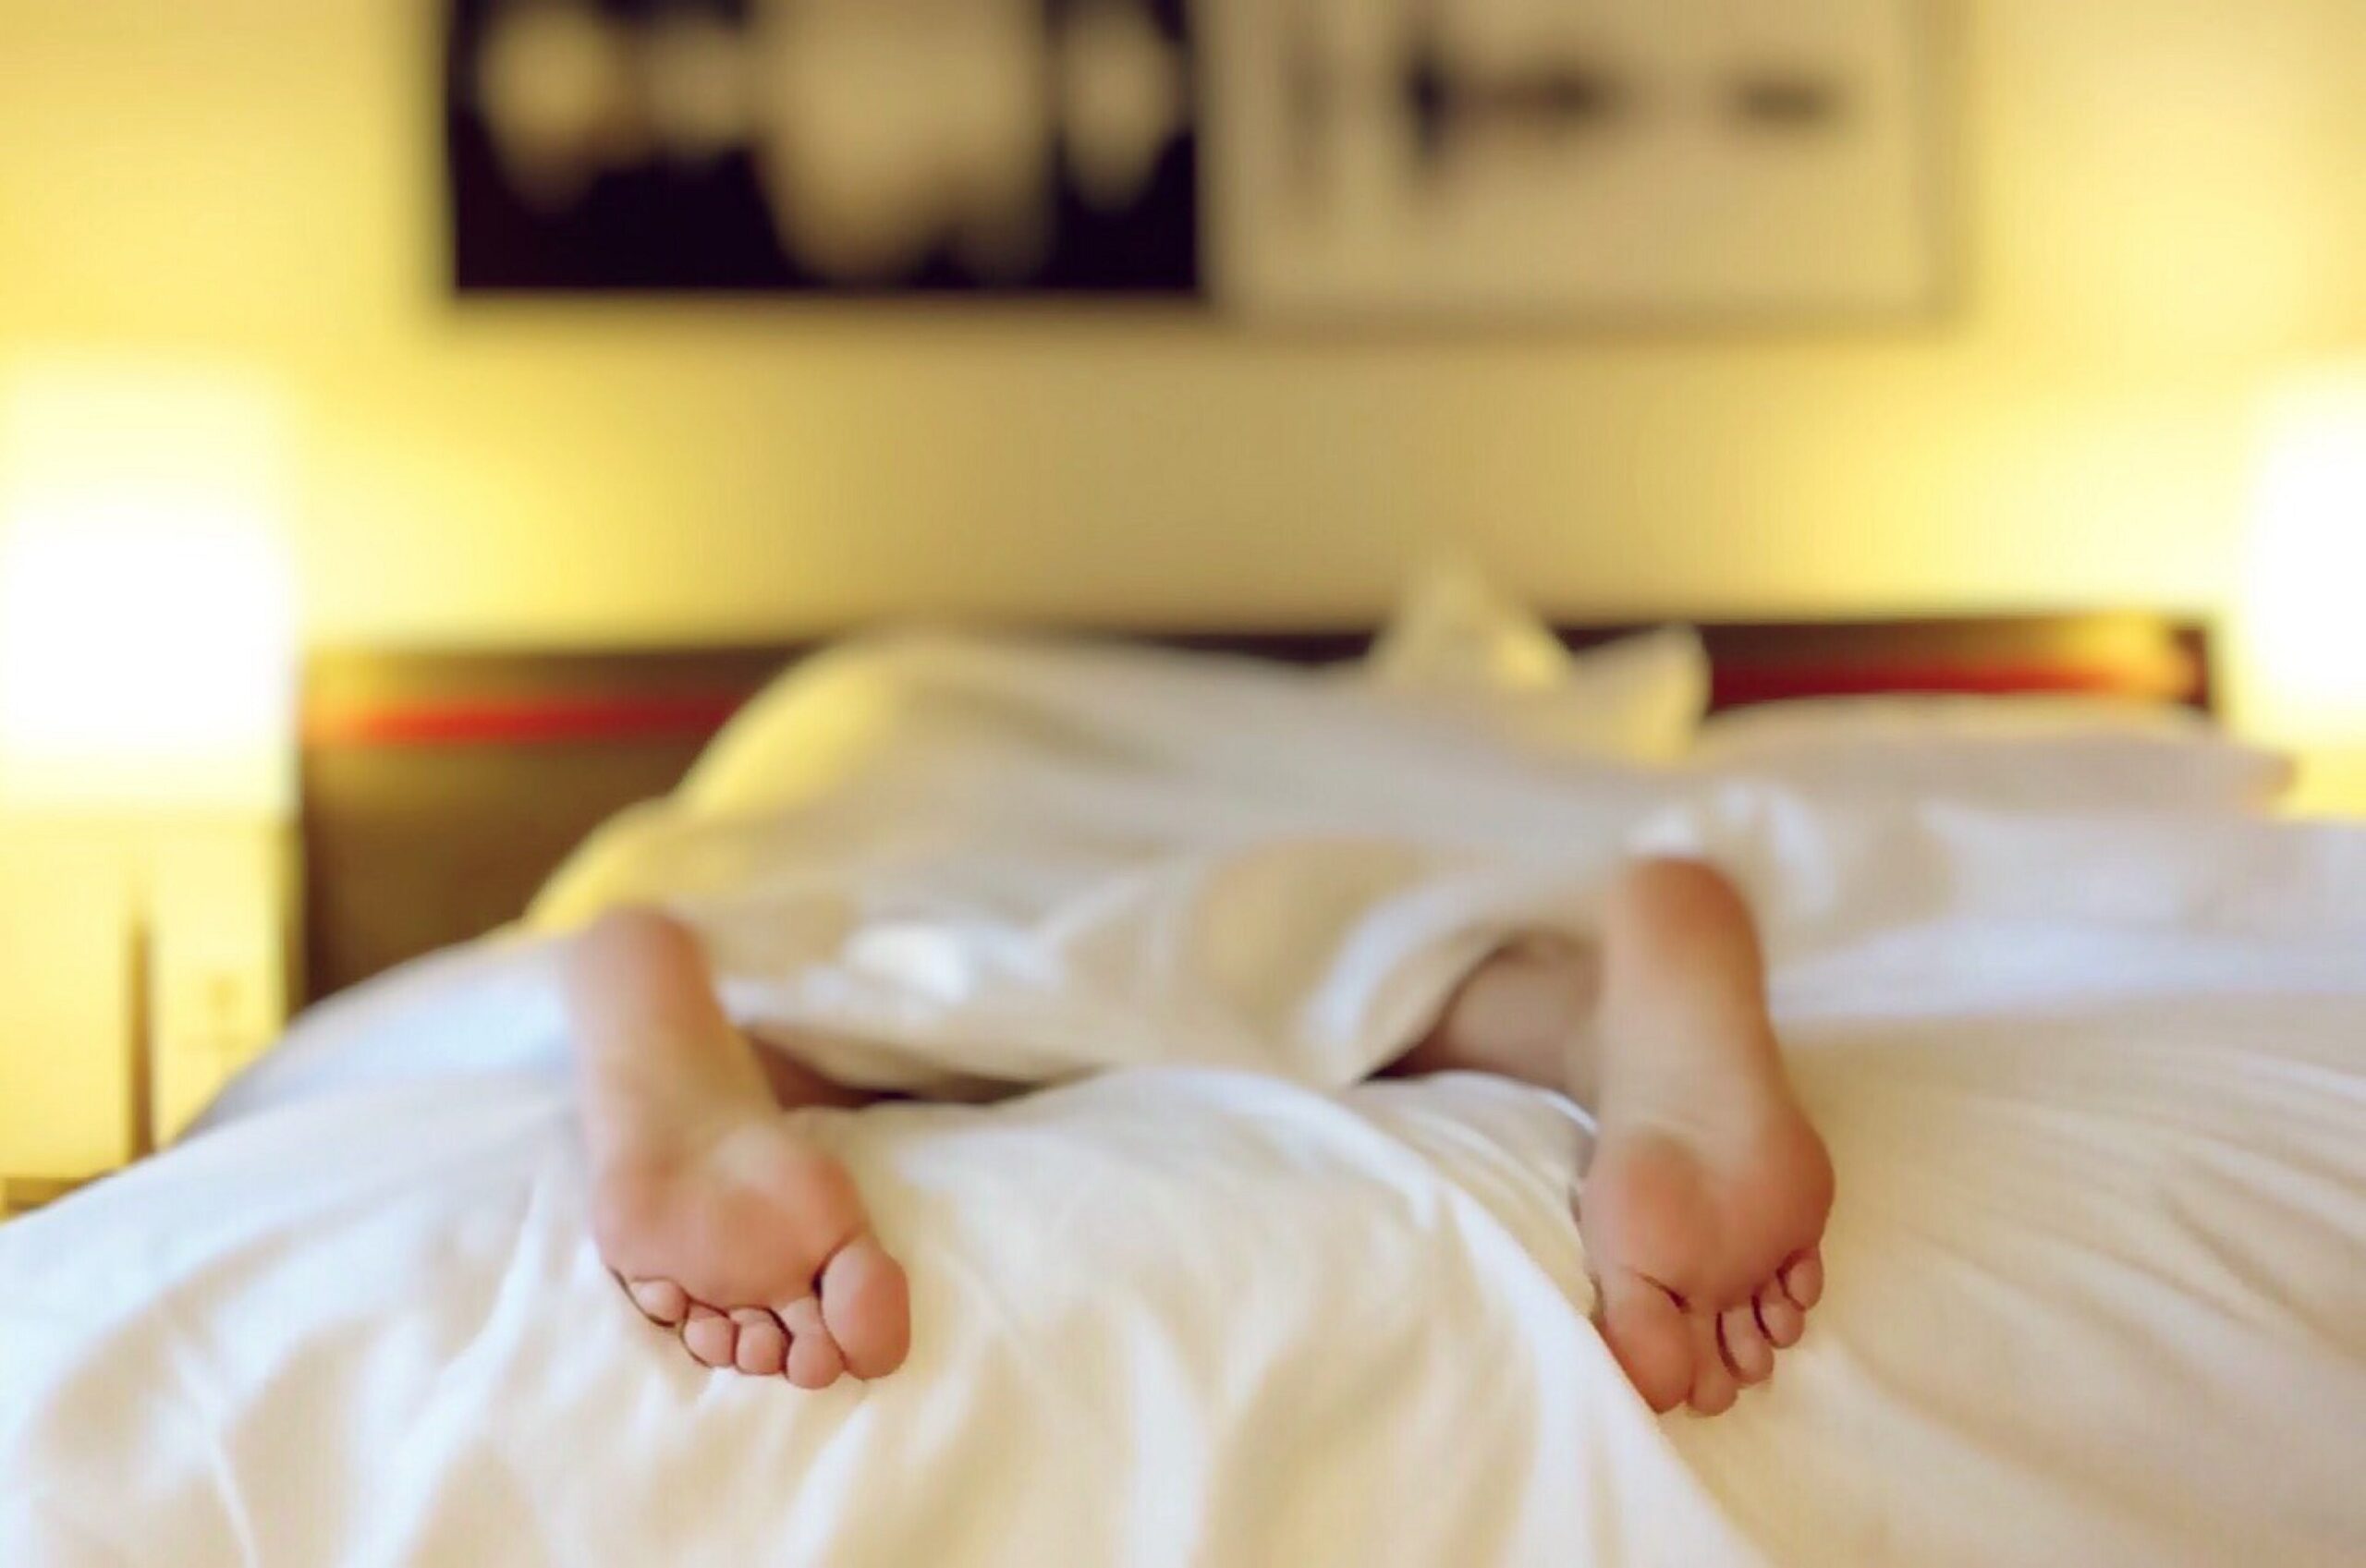 Here's what your side of the bed says about your personality